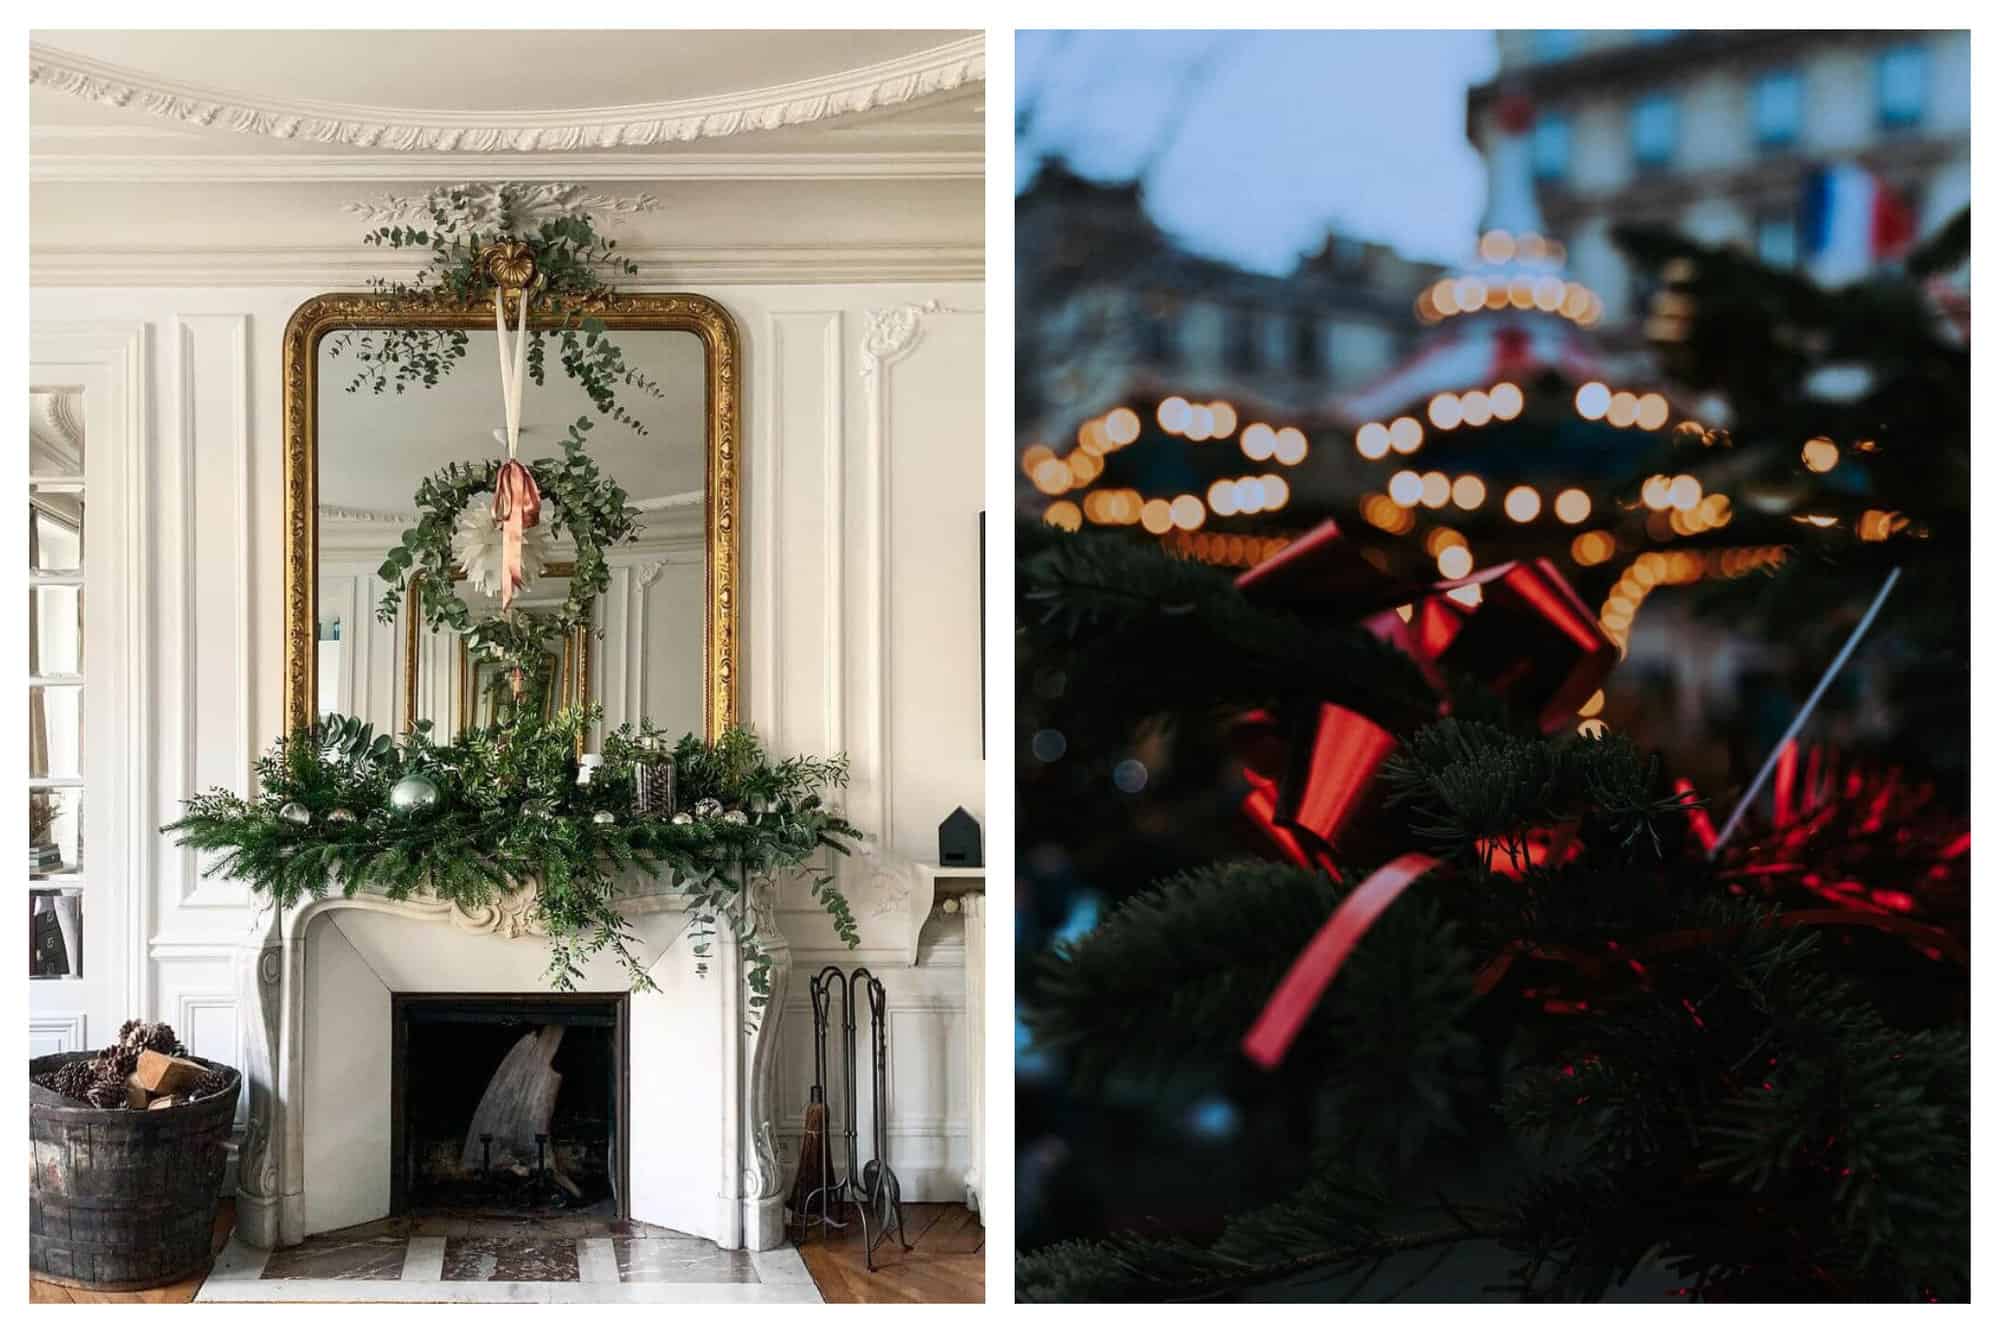 Left: A fireplace in a Parisian apartment at Christmastime. The walls and fireplace are white and there is a large gold trimmed mirror hung over the fireplace. There are decorations made from greenery on the mantlepiece as well as silver Christmas ornaments and a wreath hung over the mirror with a pink bow on it. Left: a close up of a Christmas tree outside in Paris. There are red ribbons on the tree. In the background a carrousel can be seen with lights on it. 